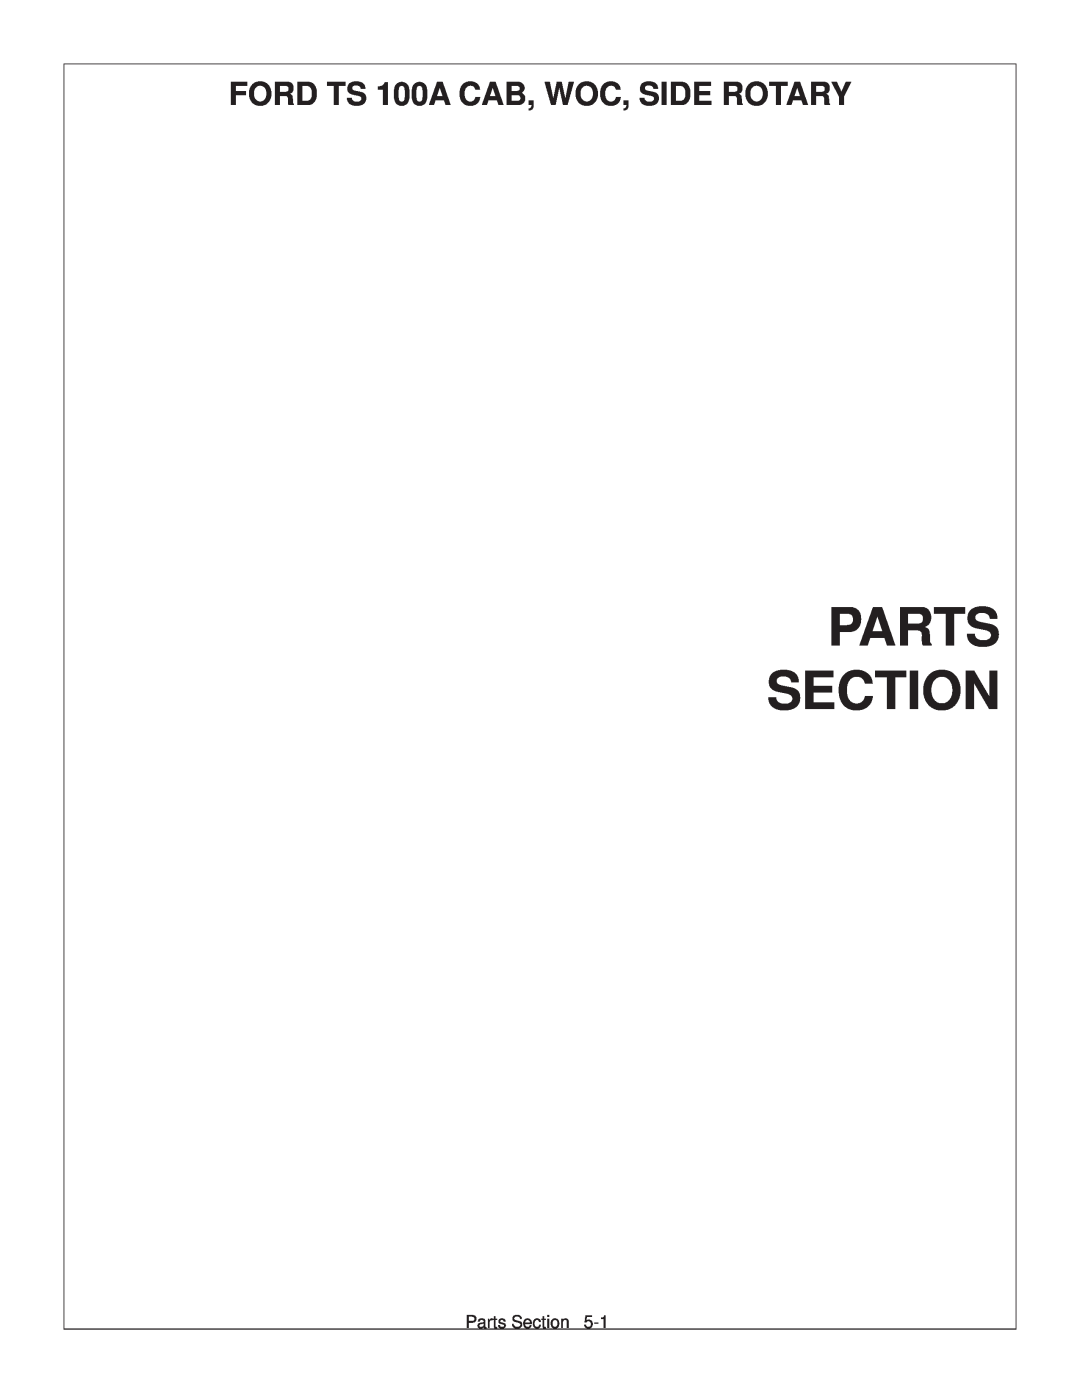 Tiger Products Co., Ltd manual Parts Section, FORD TS 100A CAB, WOC, SIDE ROTARY 